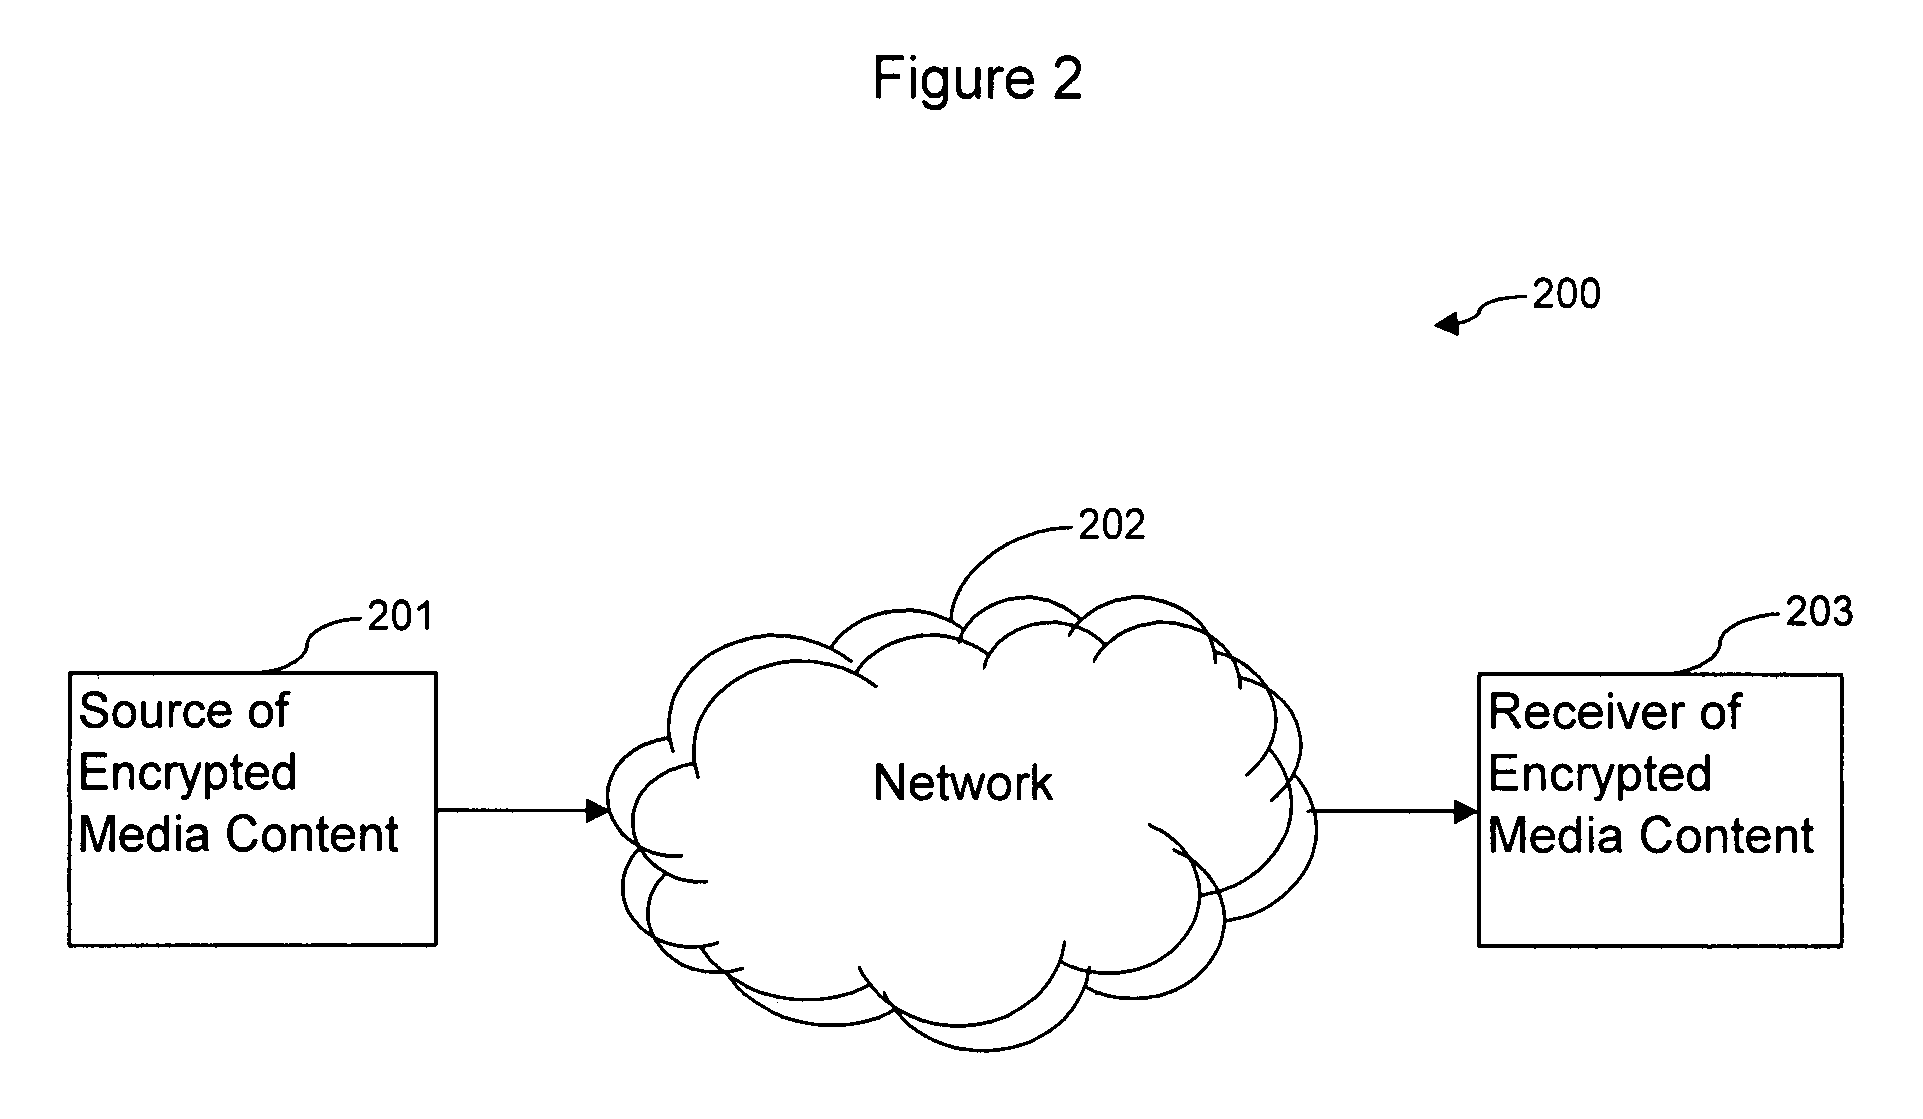 Apparatus and method for enhancing the protection of media content